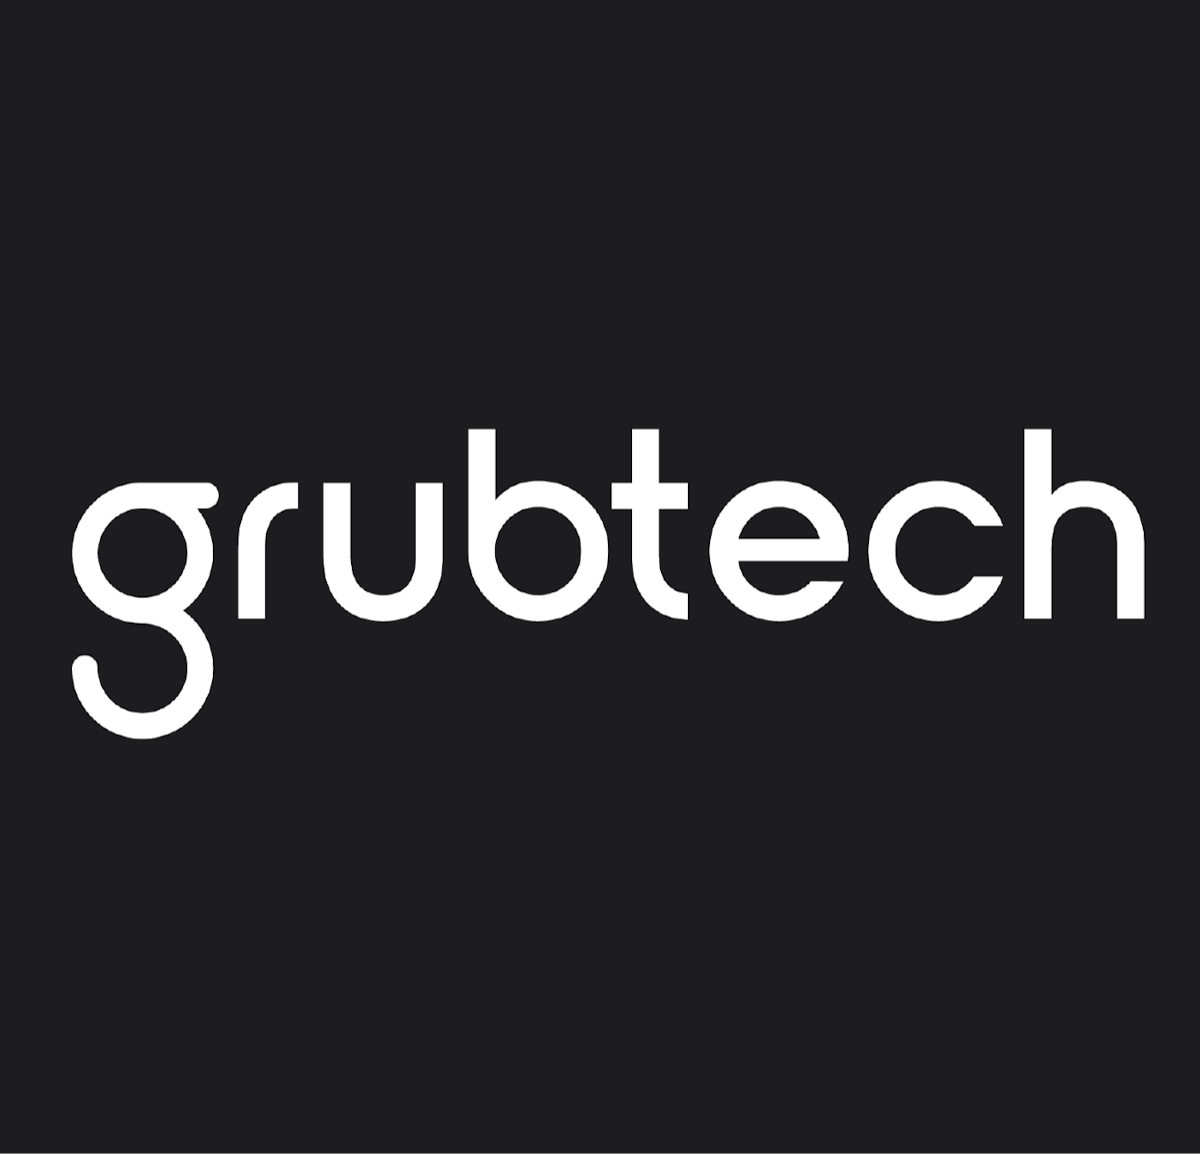 featured image - Grubtech - Revolutionizing UX With Disruptive Tech 